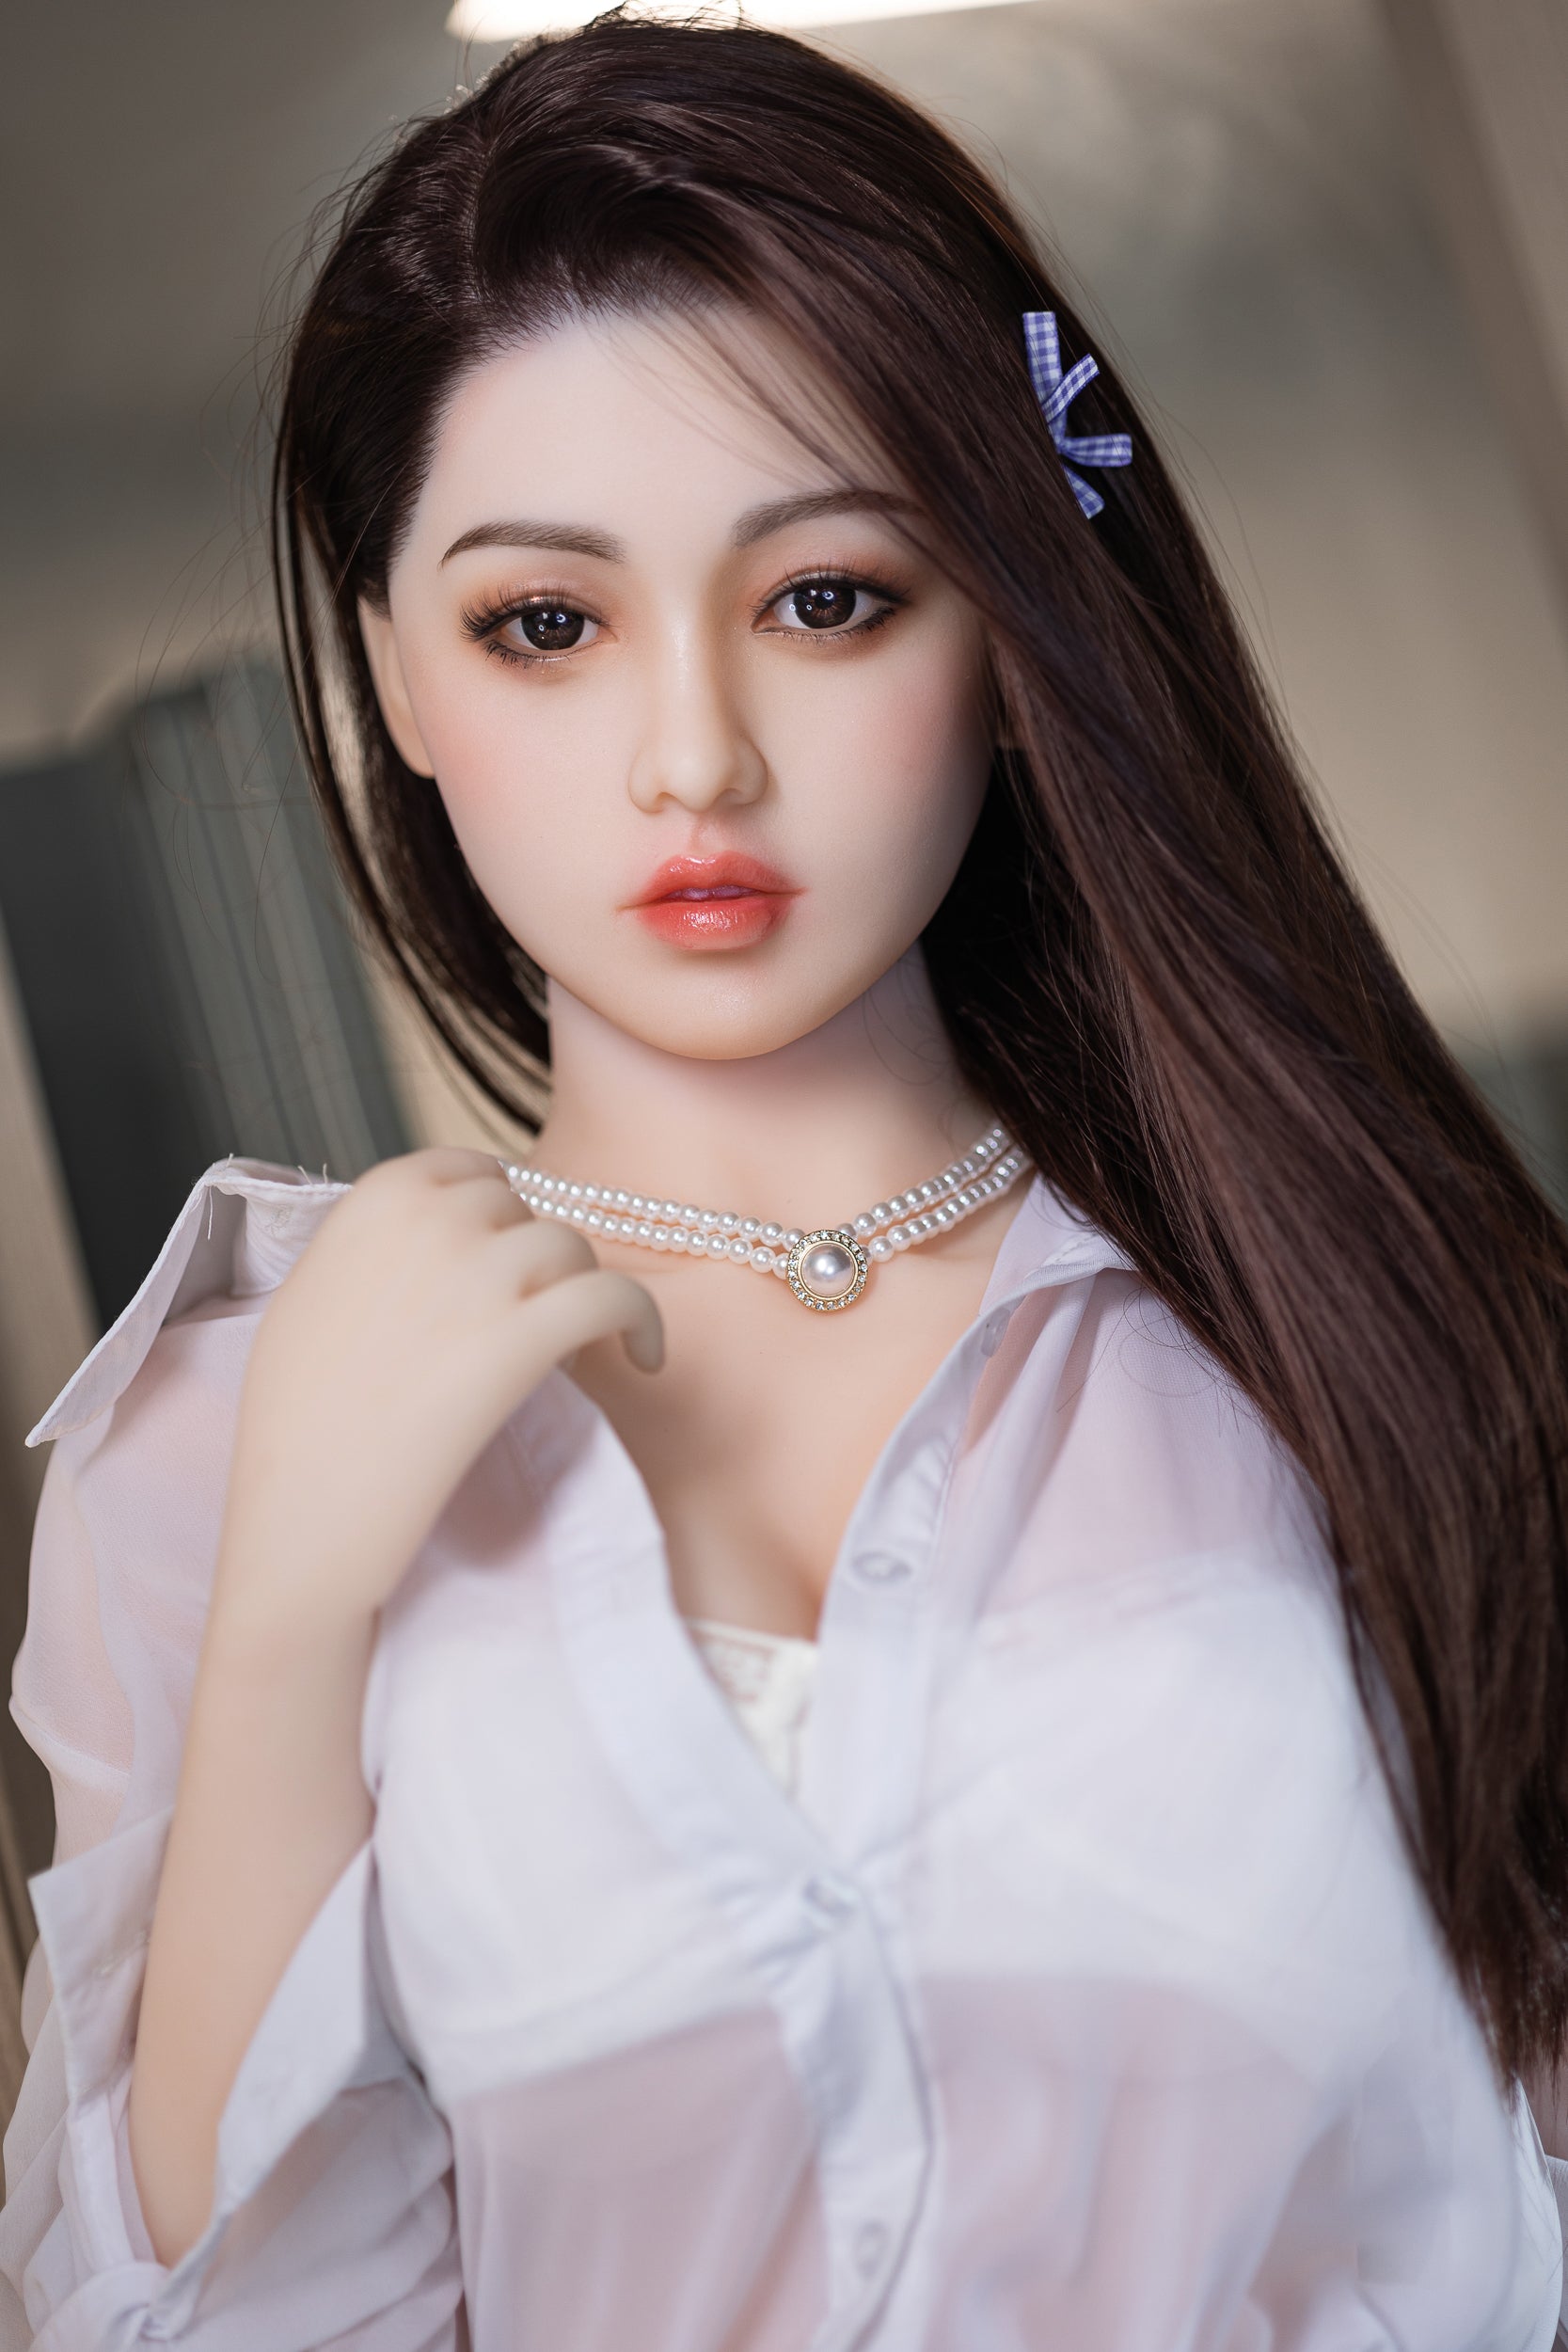 Aibei Doll 165 cm Fusion - Calantha | Buy Sex Dolls at DOLLS ACTUALLY